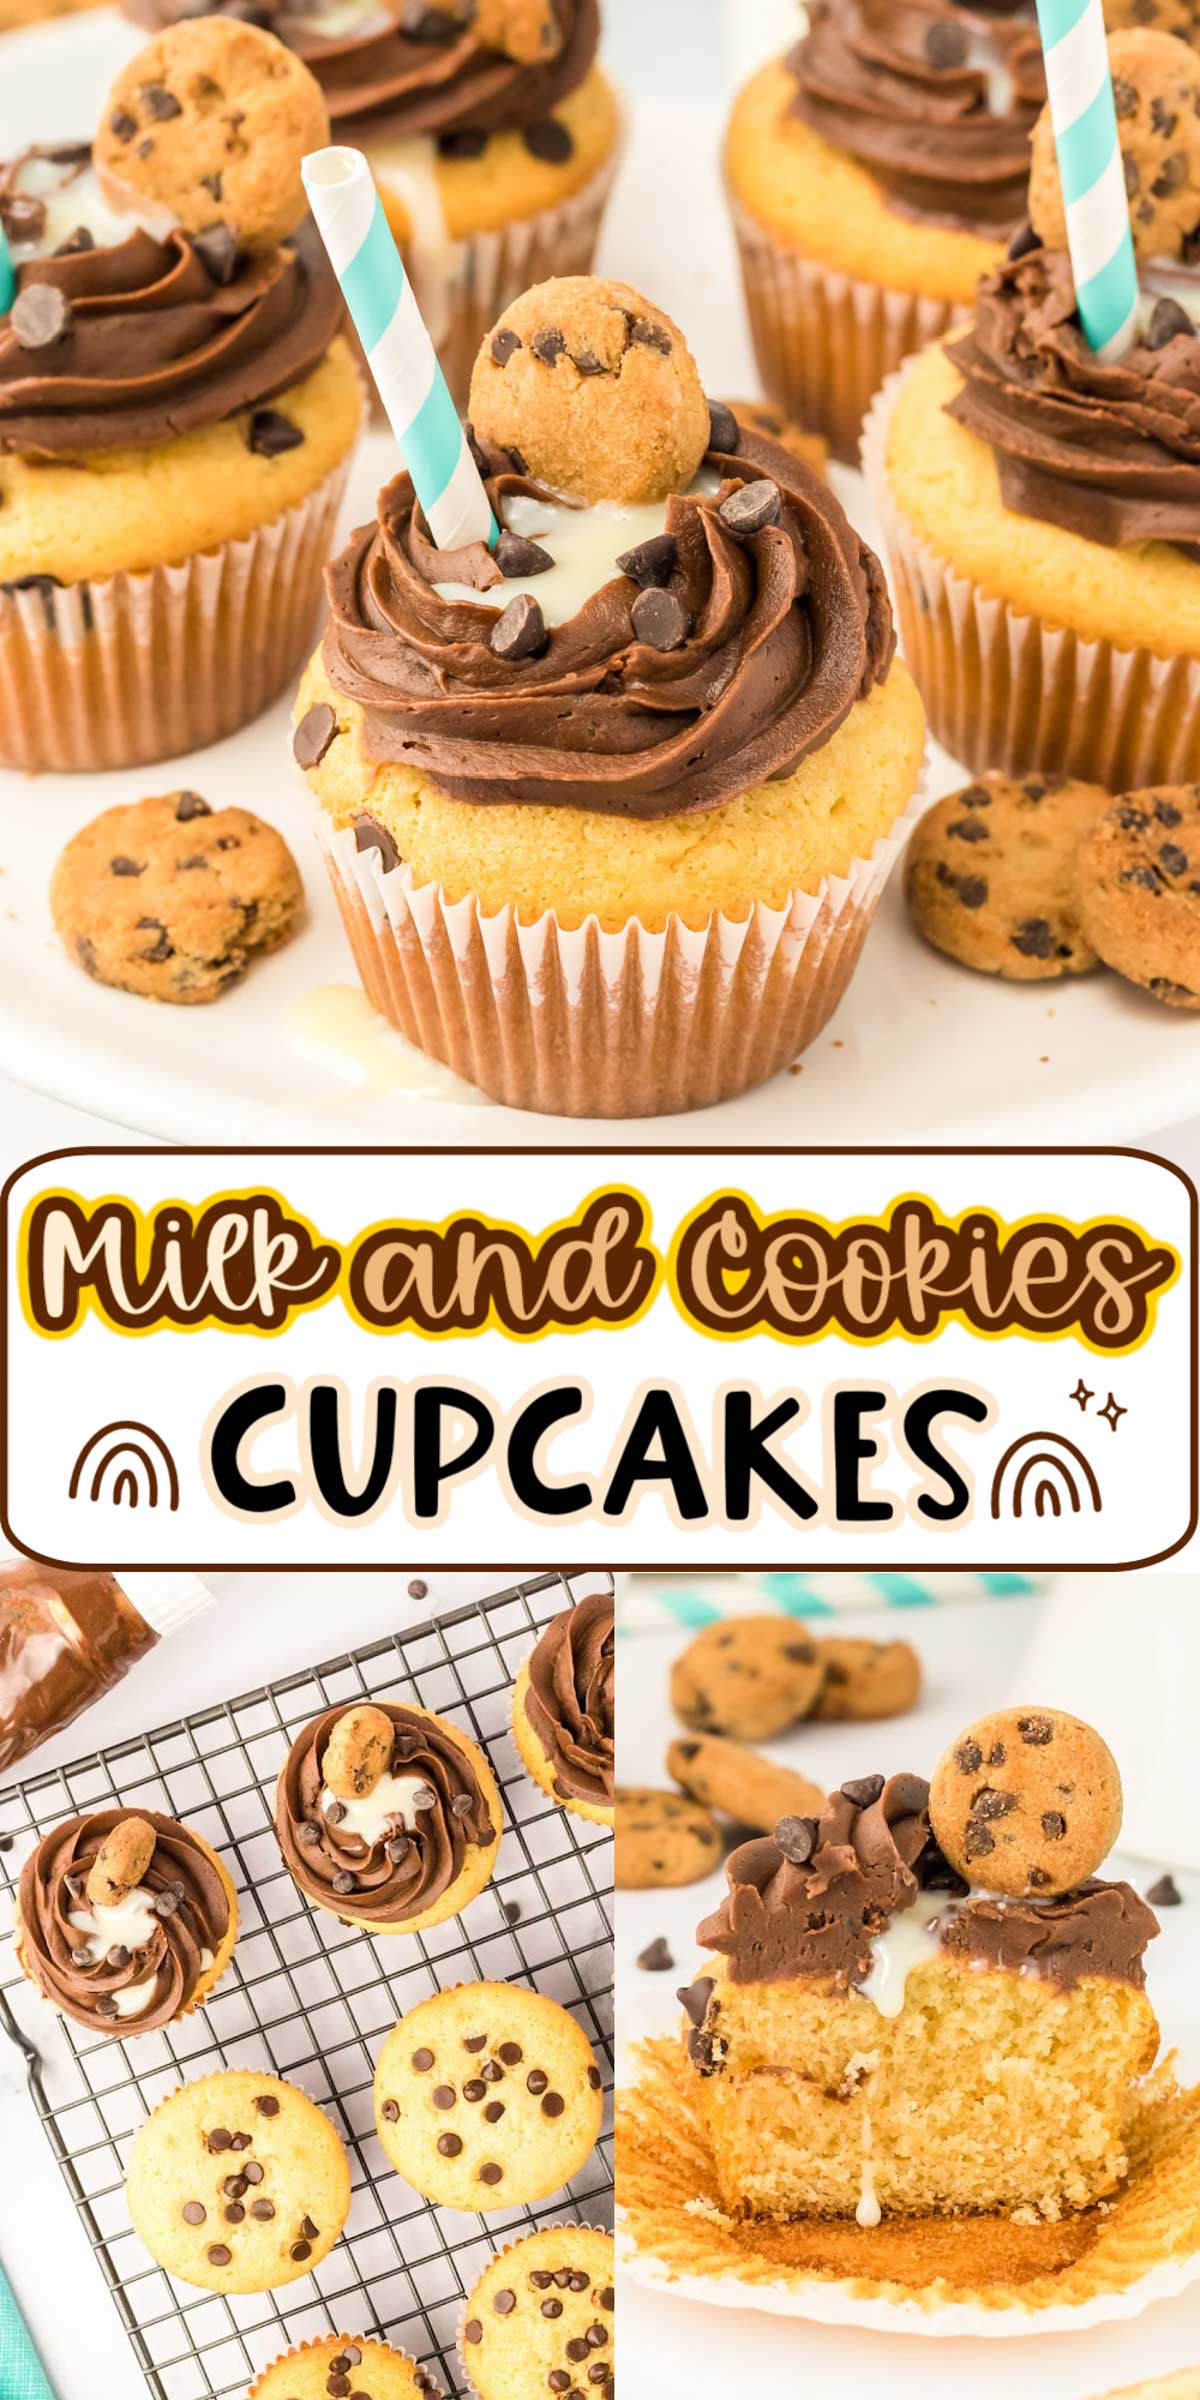 These fun Milk and Cookies Cupcakes are topped with homemade chocolate frosting, sweetened condensed milk, and a mini chocolate chip cookie! Guaranteed to be the center of attention at every party! via @sugarandsoulco